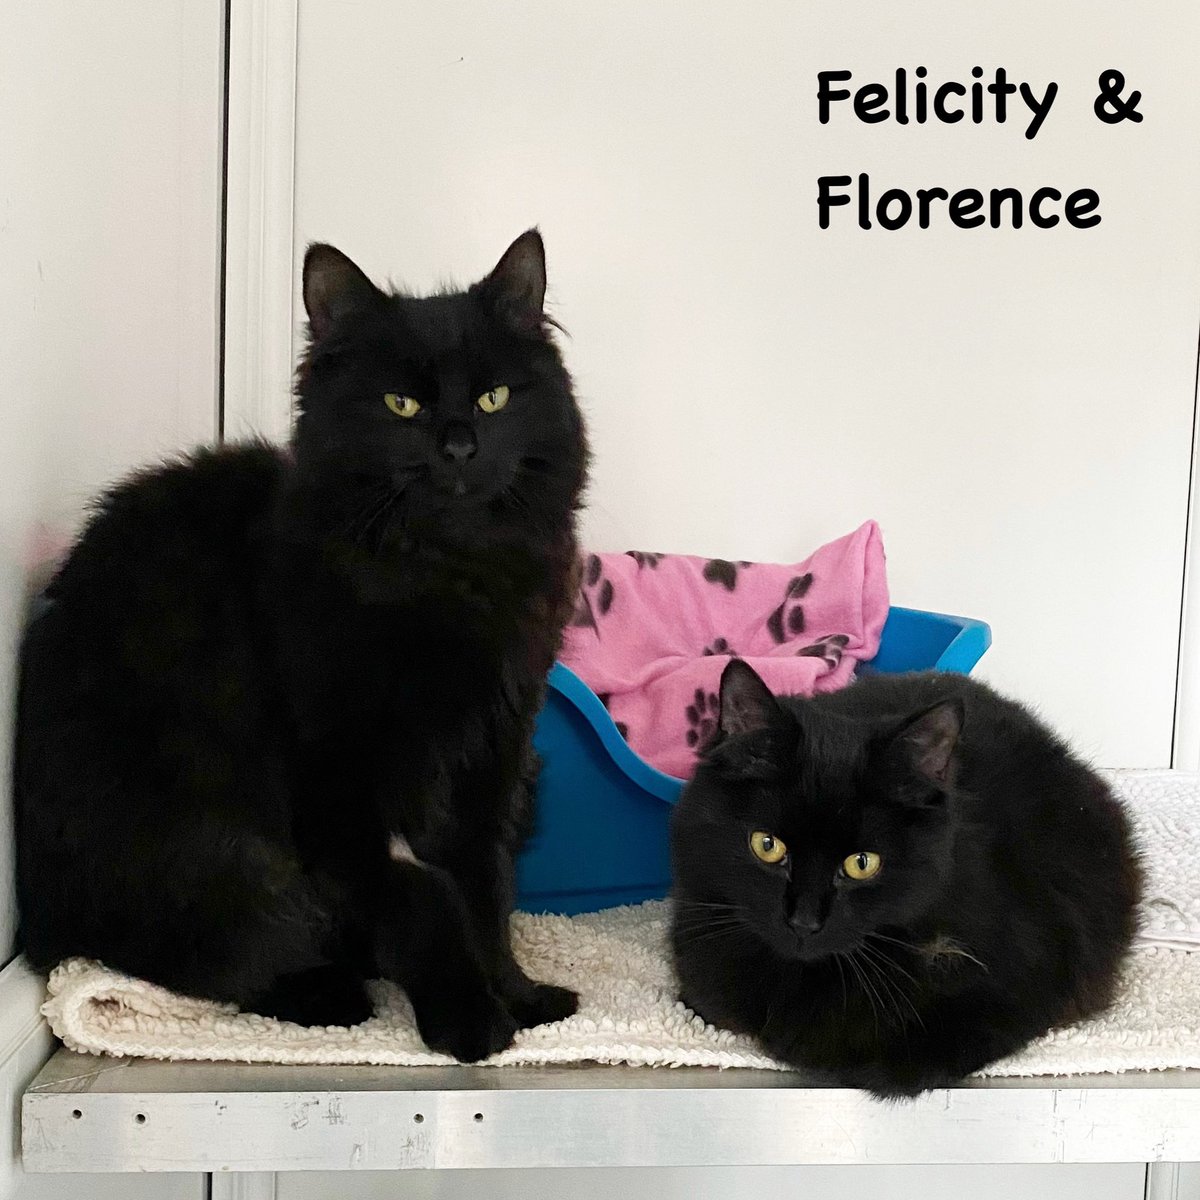 More #happyhomings news - these two cuties, Felicity and Florence, have found their new home together. Sending best wishes to them and their new family 😸 #hurrayforhomings #AdoptDontShop